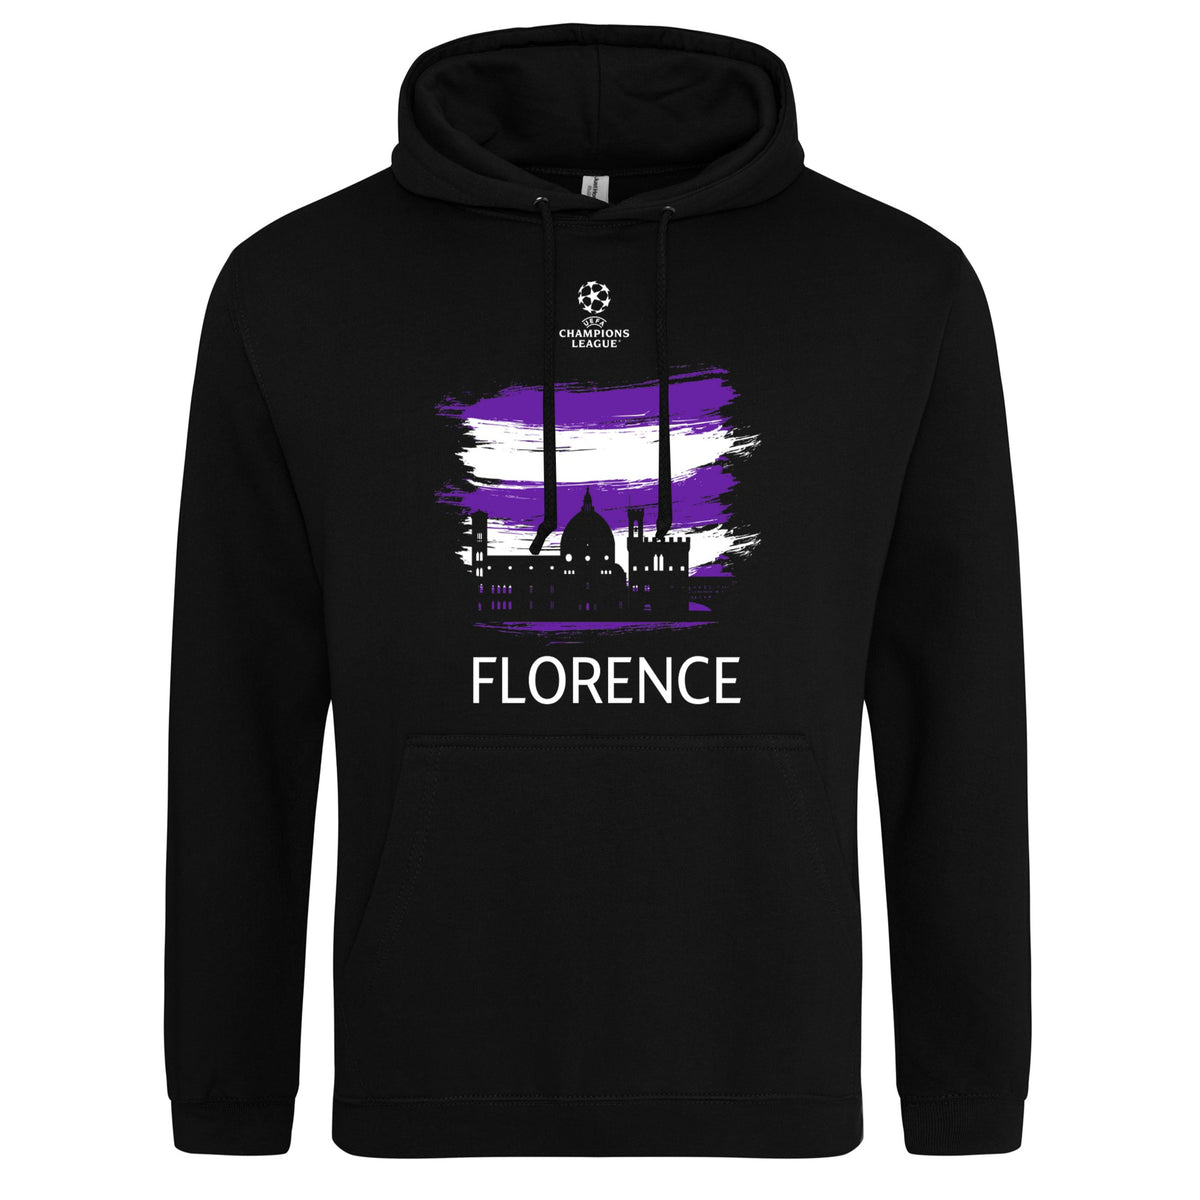 Champions League Florence City Painted Skyline Hoodie Black